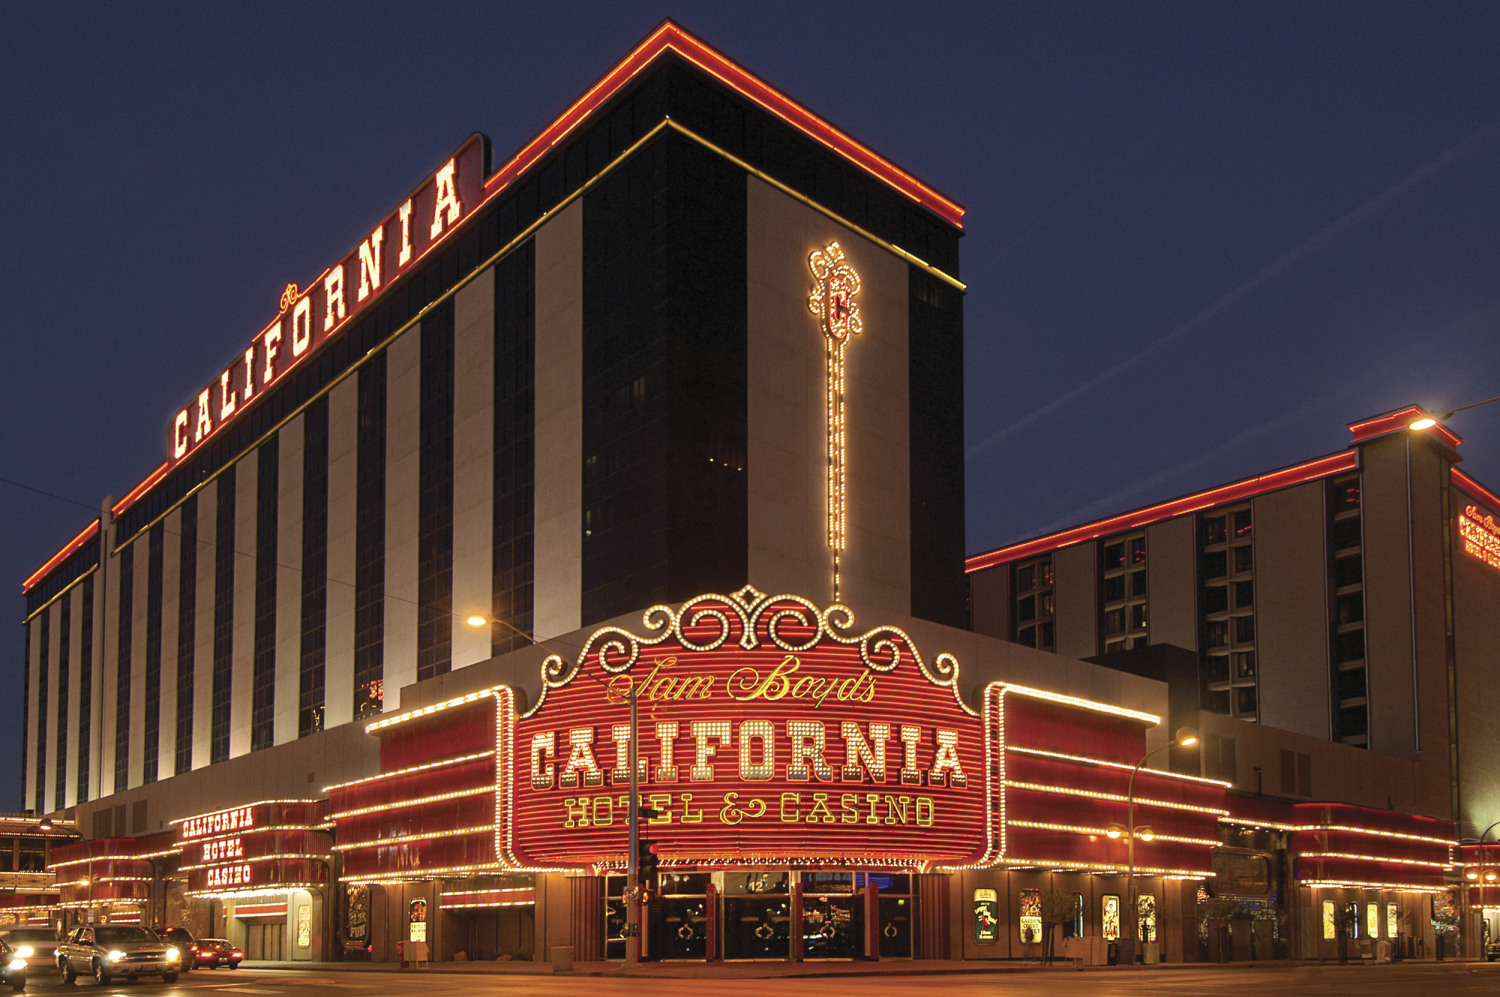 Meet the six companies that own the most casinos in Vegas and